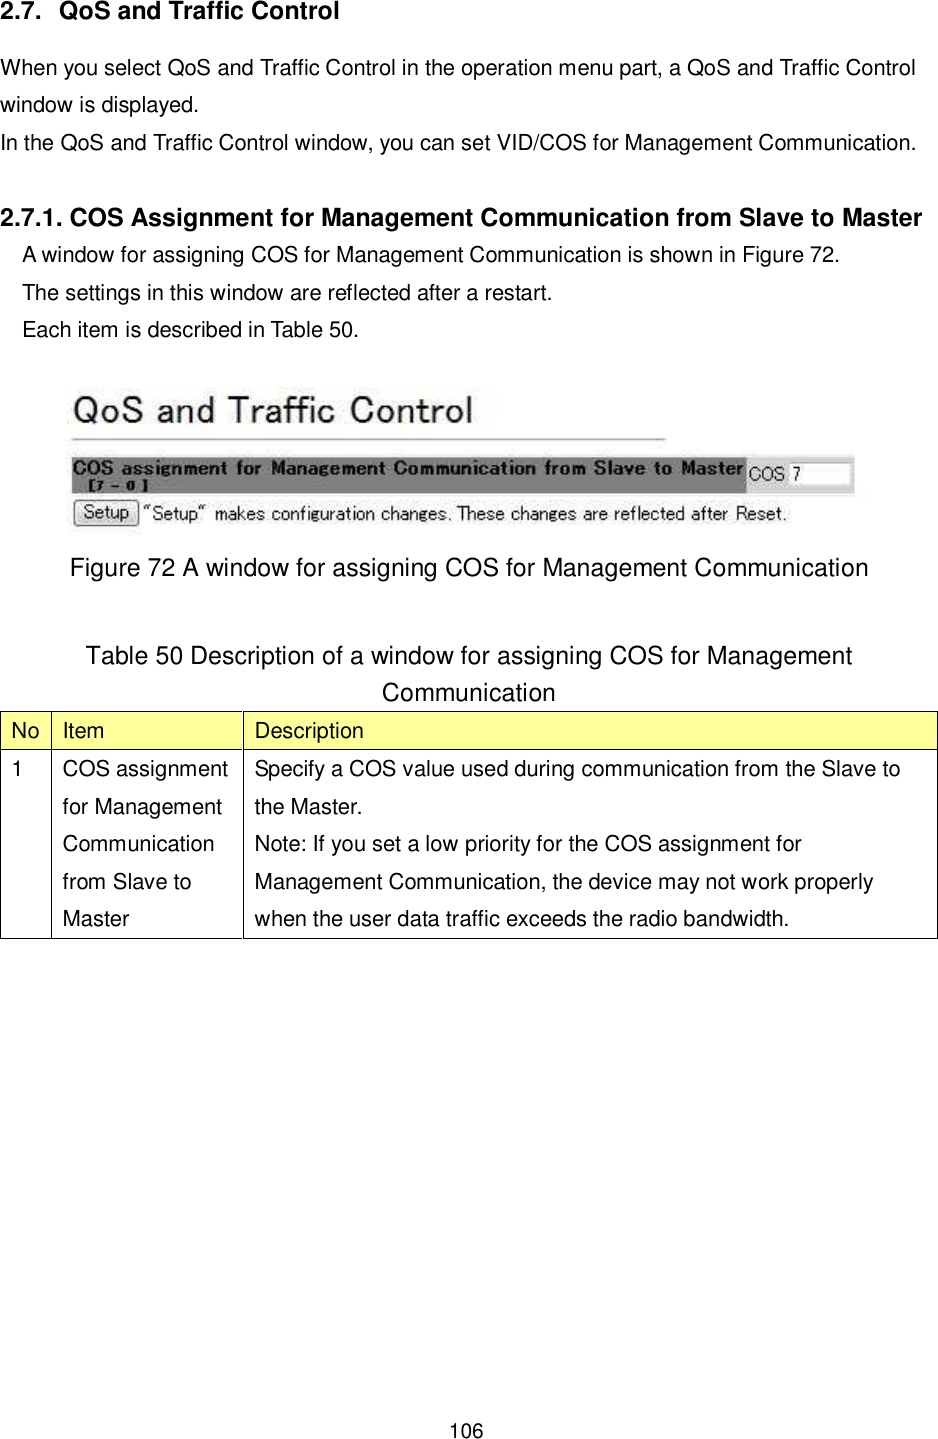    106   2.7.  QoS and Traffic Control When you select QoS and Traffic Control in the operation menu part, a QoS and Traffic Control window is displayed. In the QoS and Traffic Control window, you can set VID/COS for Management Communication.  2.7.1. COS Assignment for Management Communication from Slave to Master A window for assigning COS for Management Communication is shown in Figure 72. The settings in this window are reflected after a restart. Each item is described in Table 50.   Figure 72 A window for assigning COS for Management Communication  Table 50 Description of a window for assigning COS for Management Communication No Item  Description 1  COS assignment for Management Communication from Slave to Master Specify a COS value used during communication from the Slave to the Master. Note: If you set a low priority for the COS assignment for Management Communication, the device may not work properly when the user data traffic exceeds the radio bandwidth.   